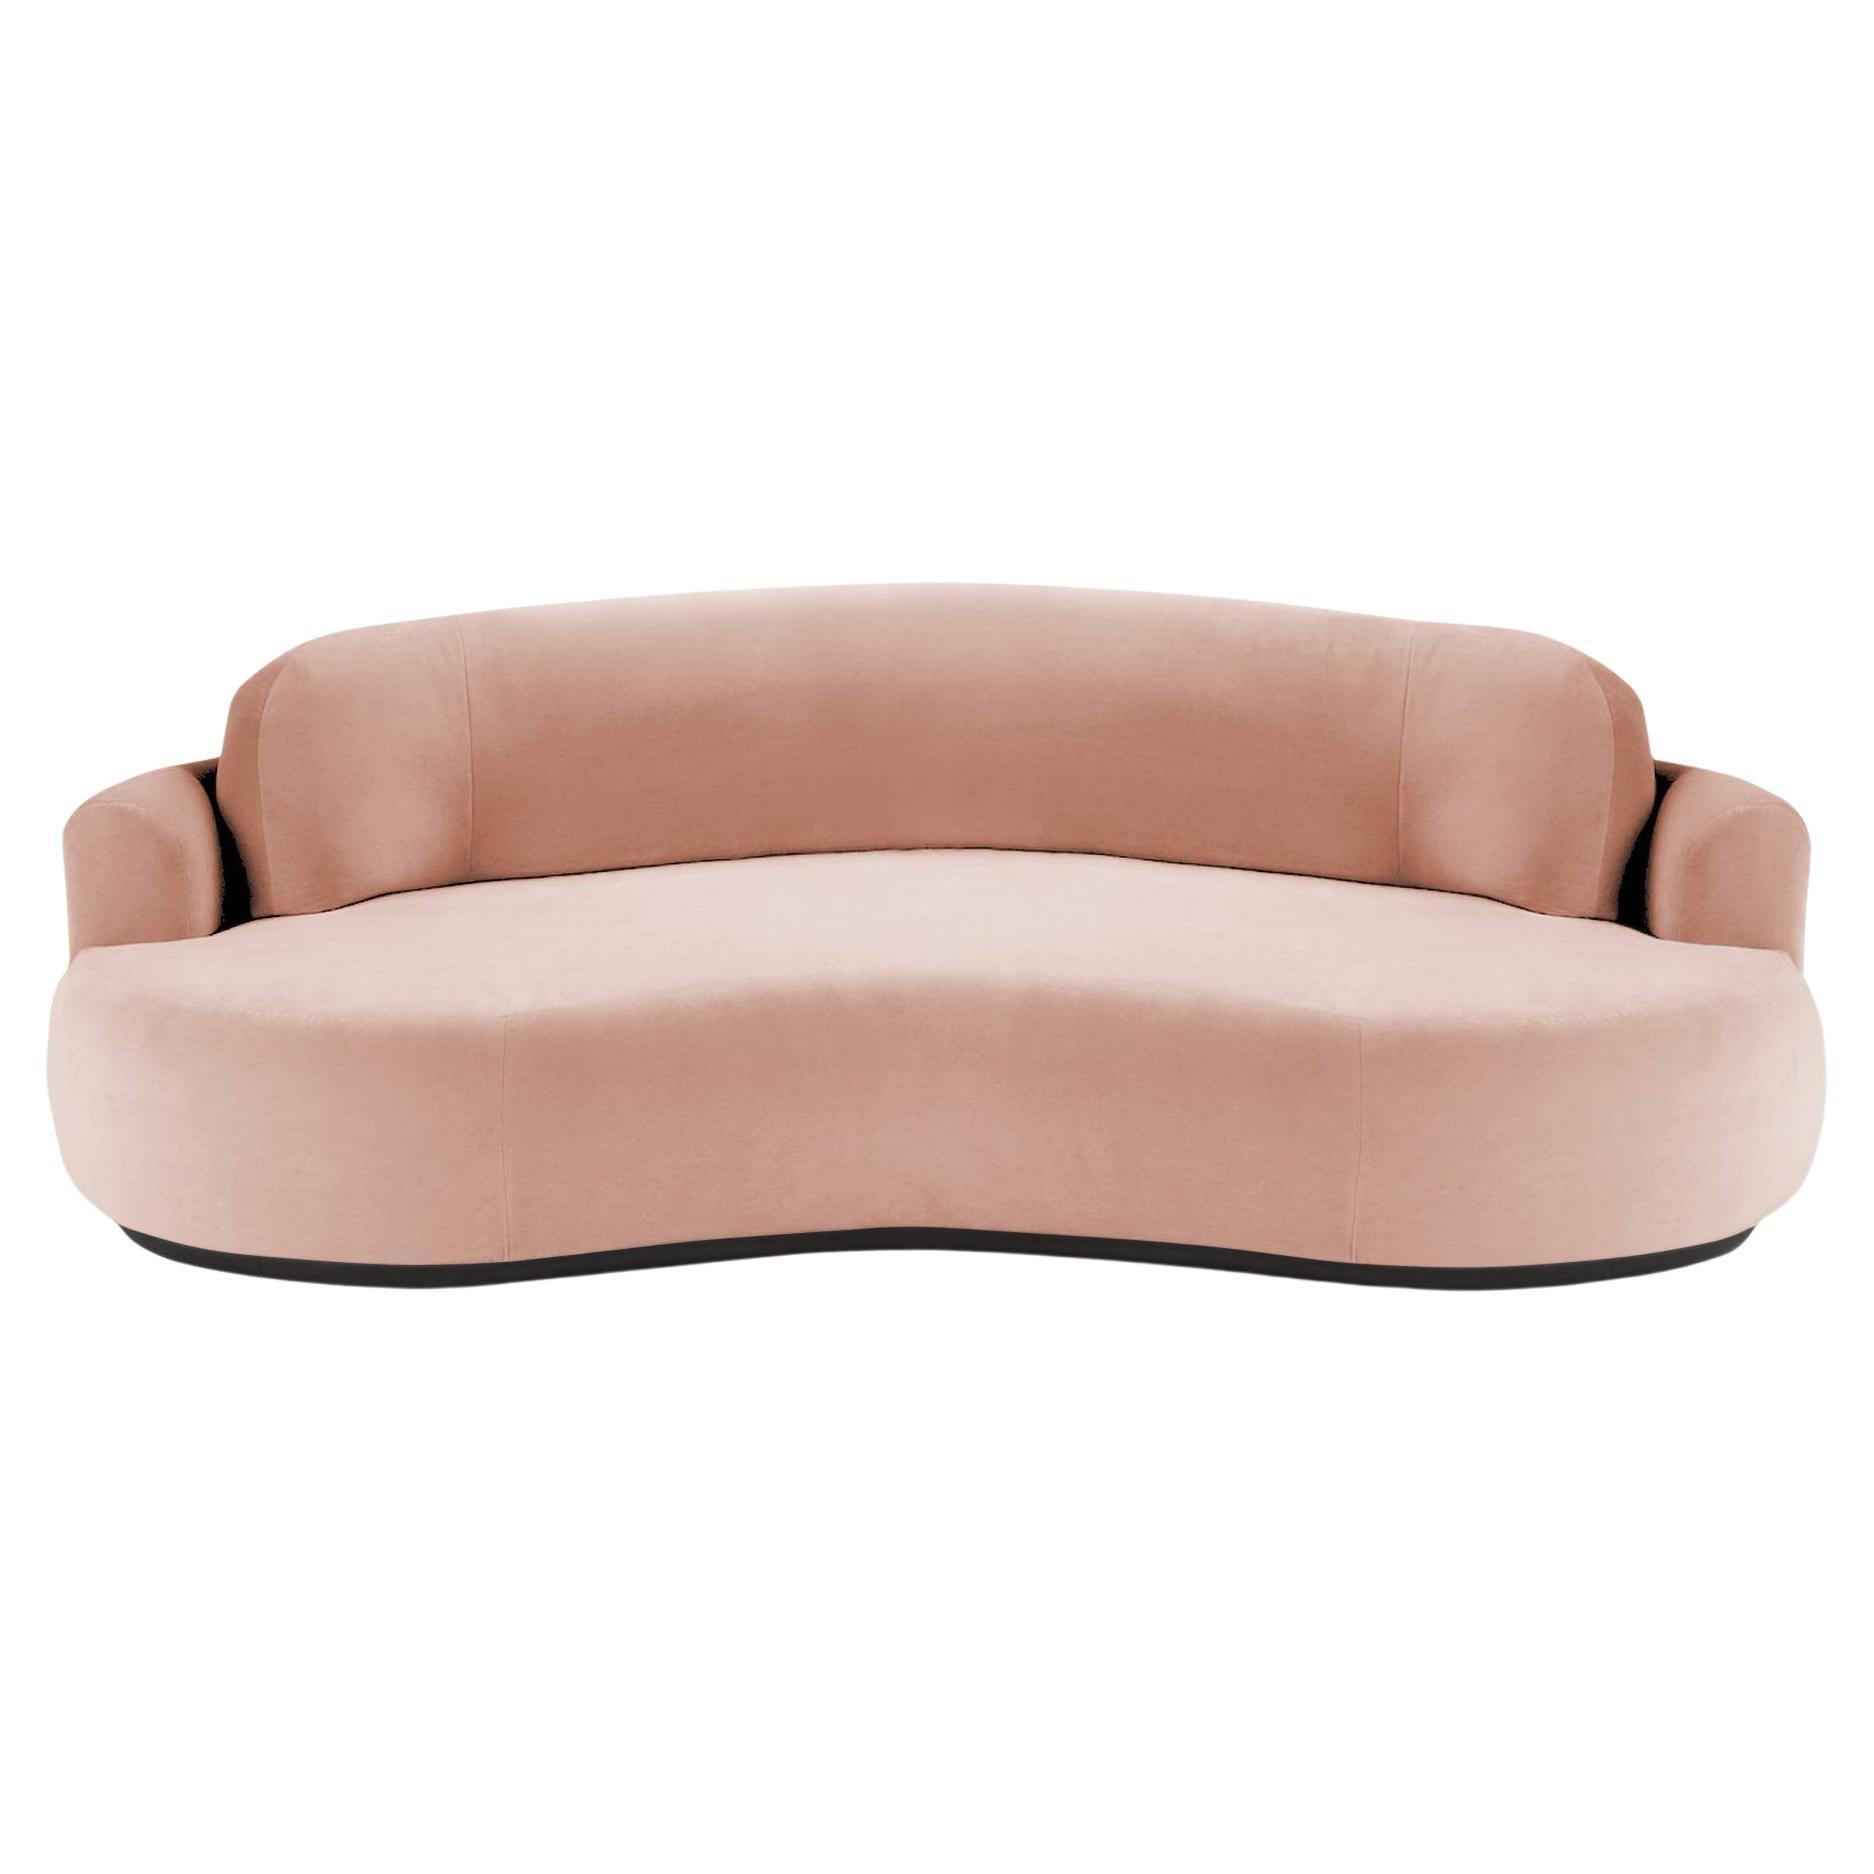 Naked Curved Sofa, Large with Beech Ash-056-5 and Vigo Blossom For Sale